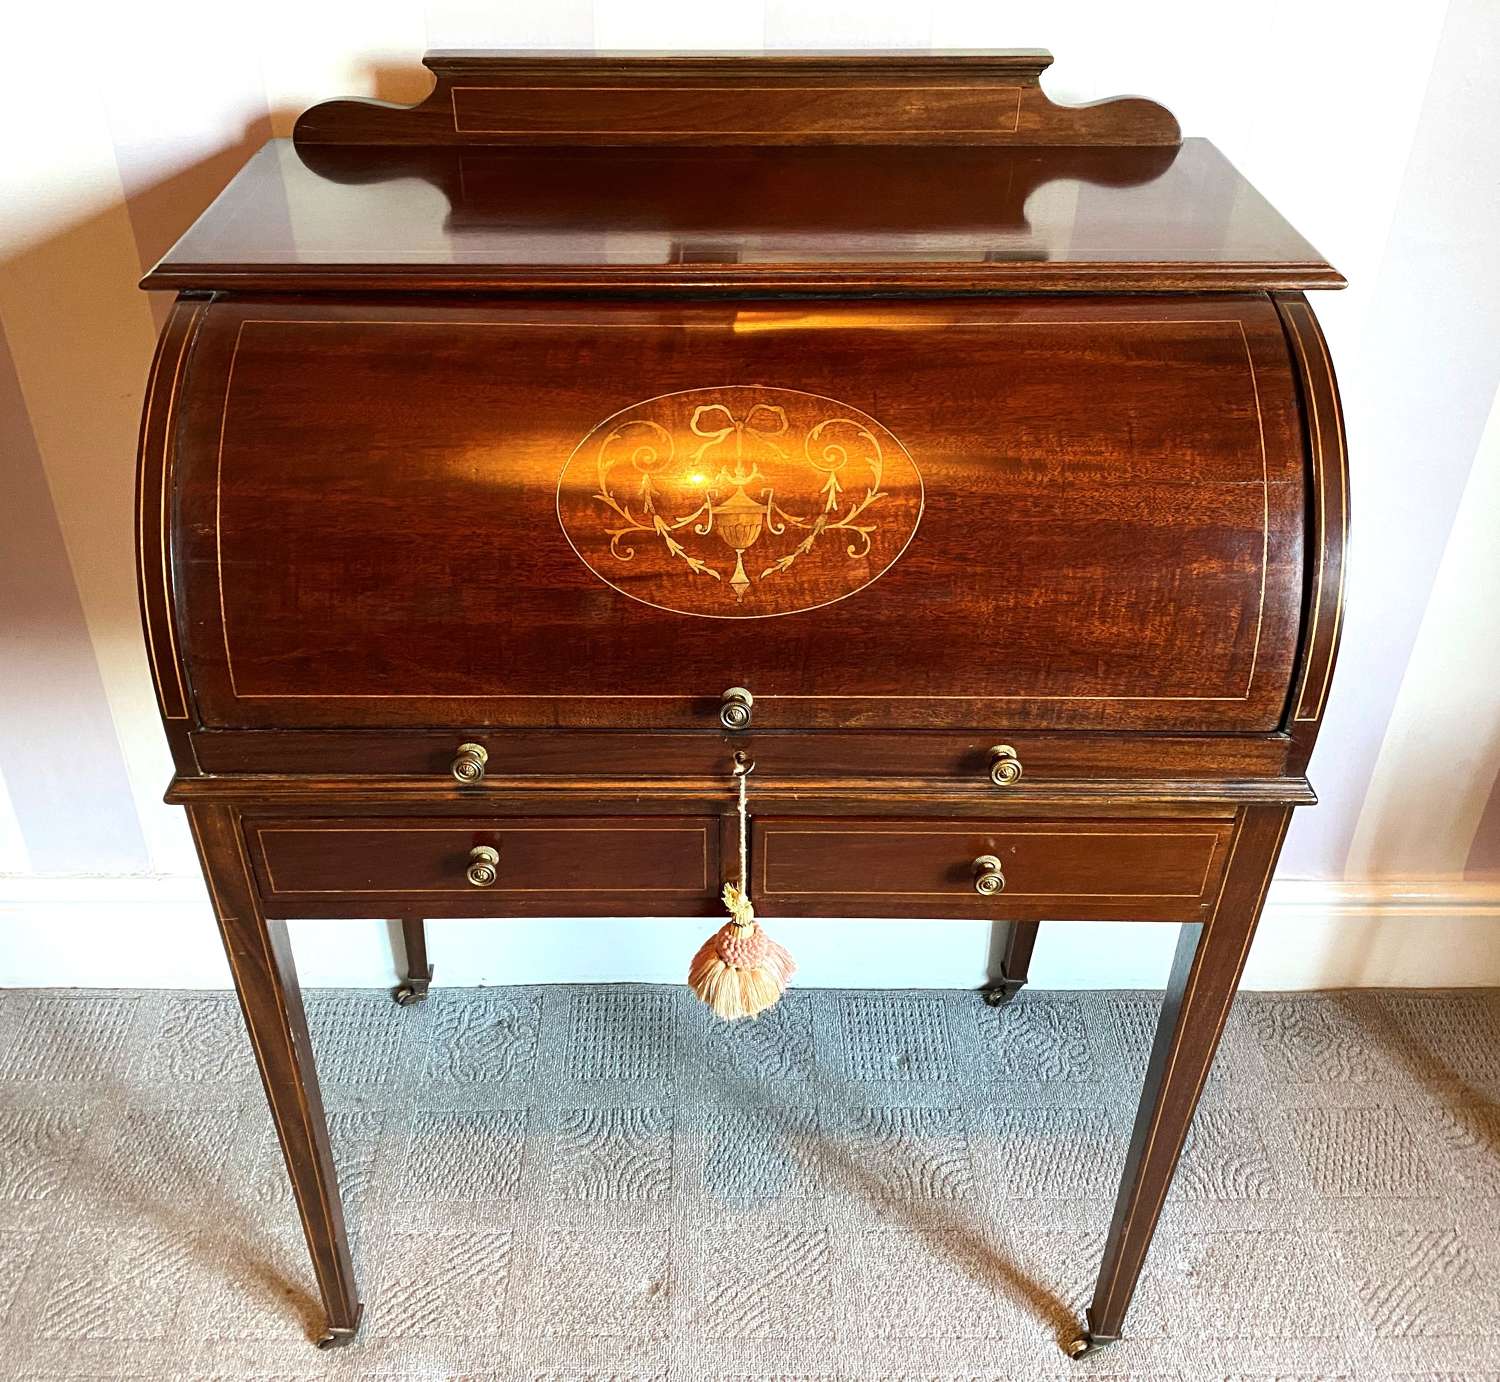 Superb Roll Top Writing Desk With Inlay